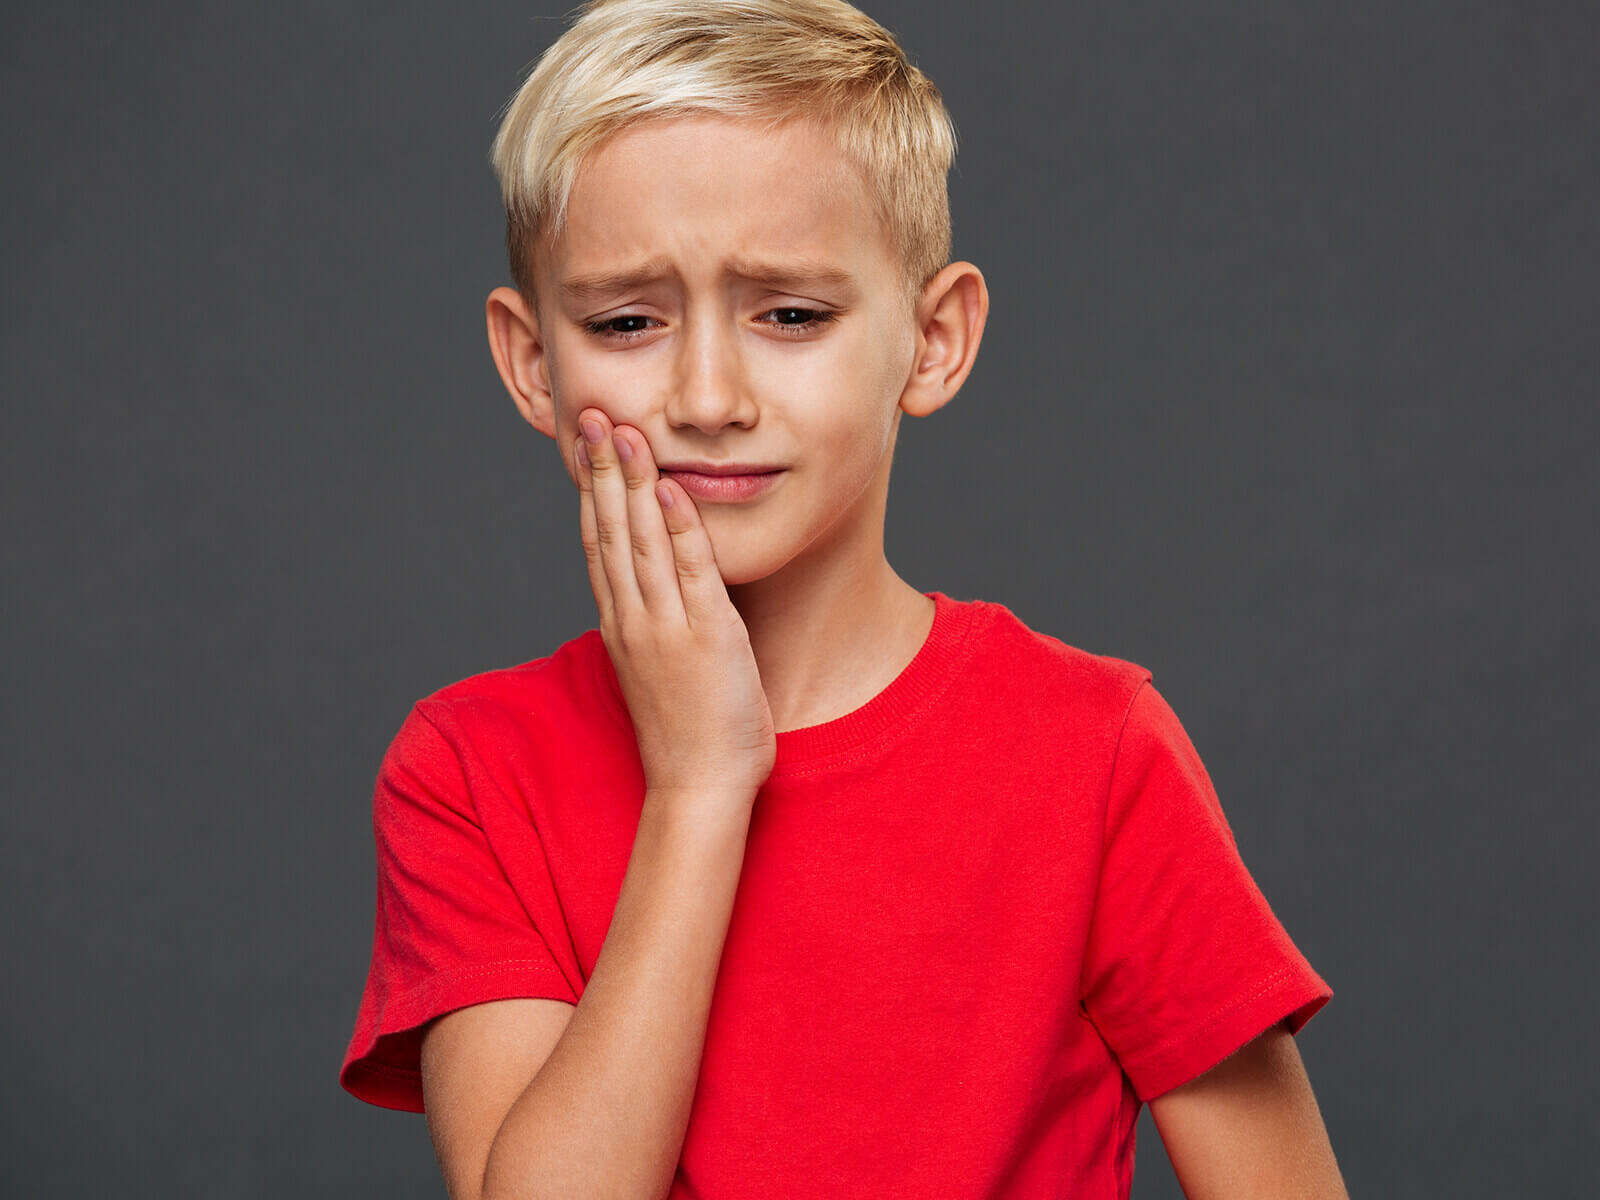 Common Pediatric Dental Problems And How To Prevent Them